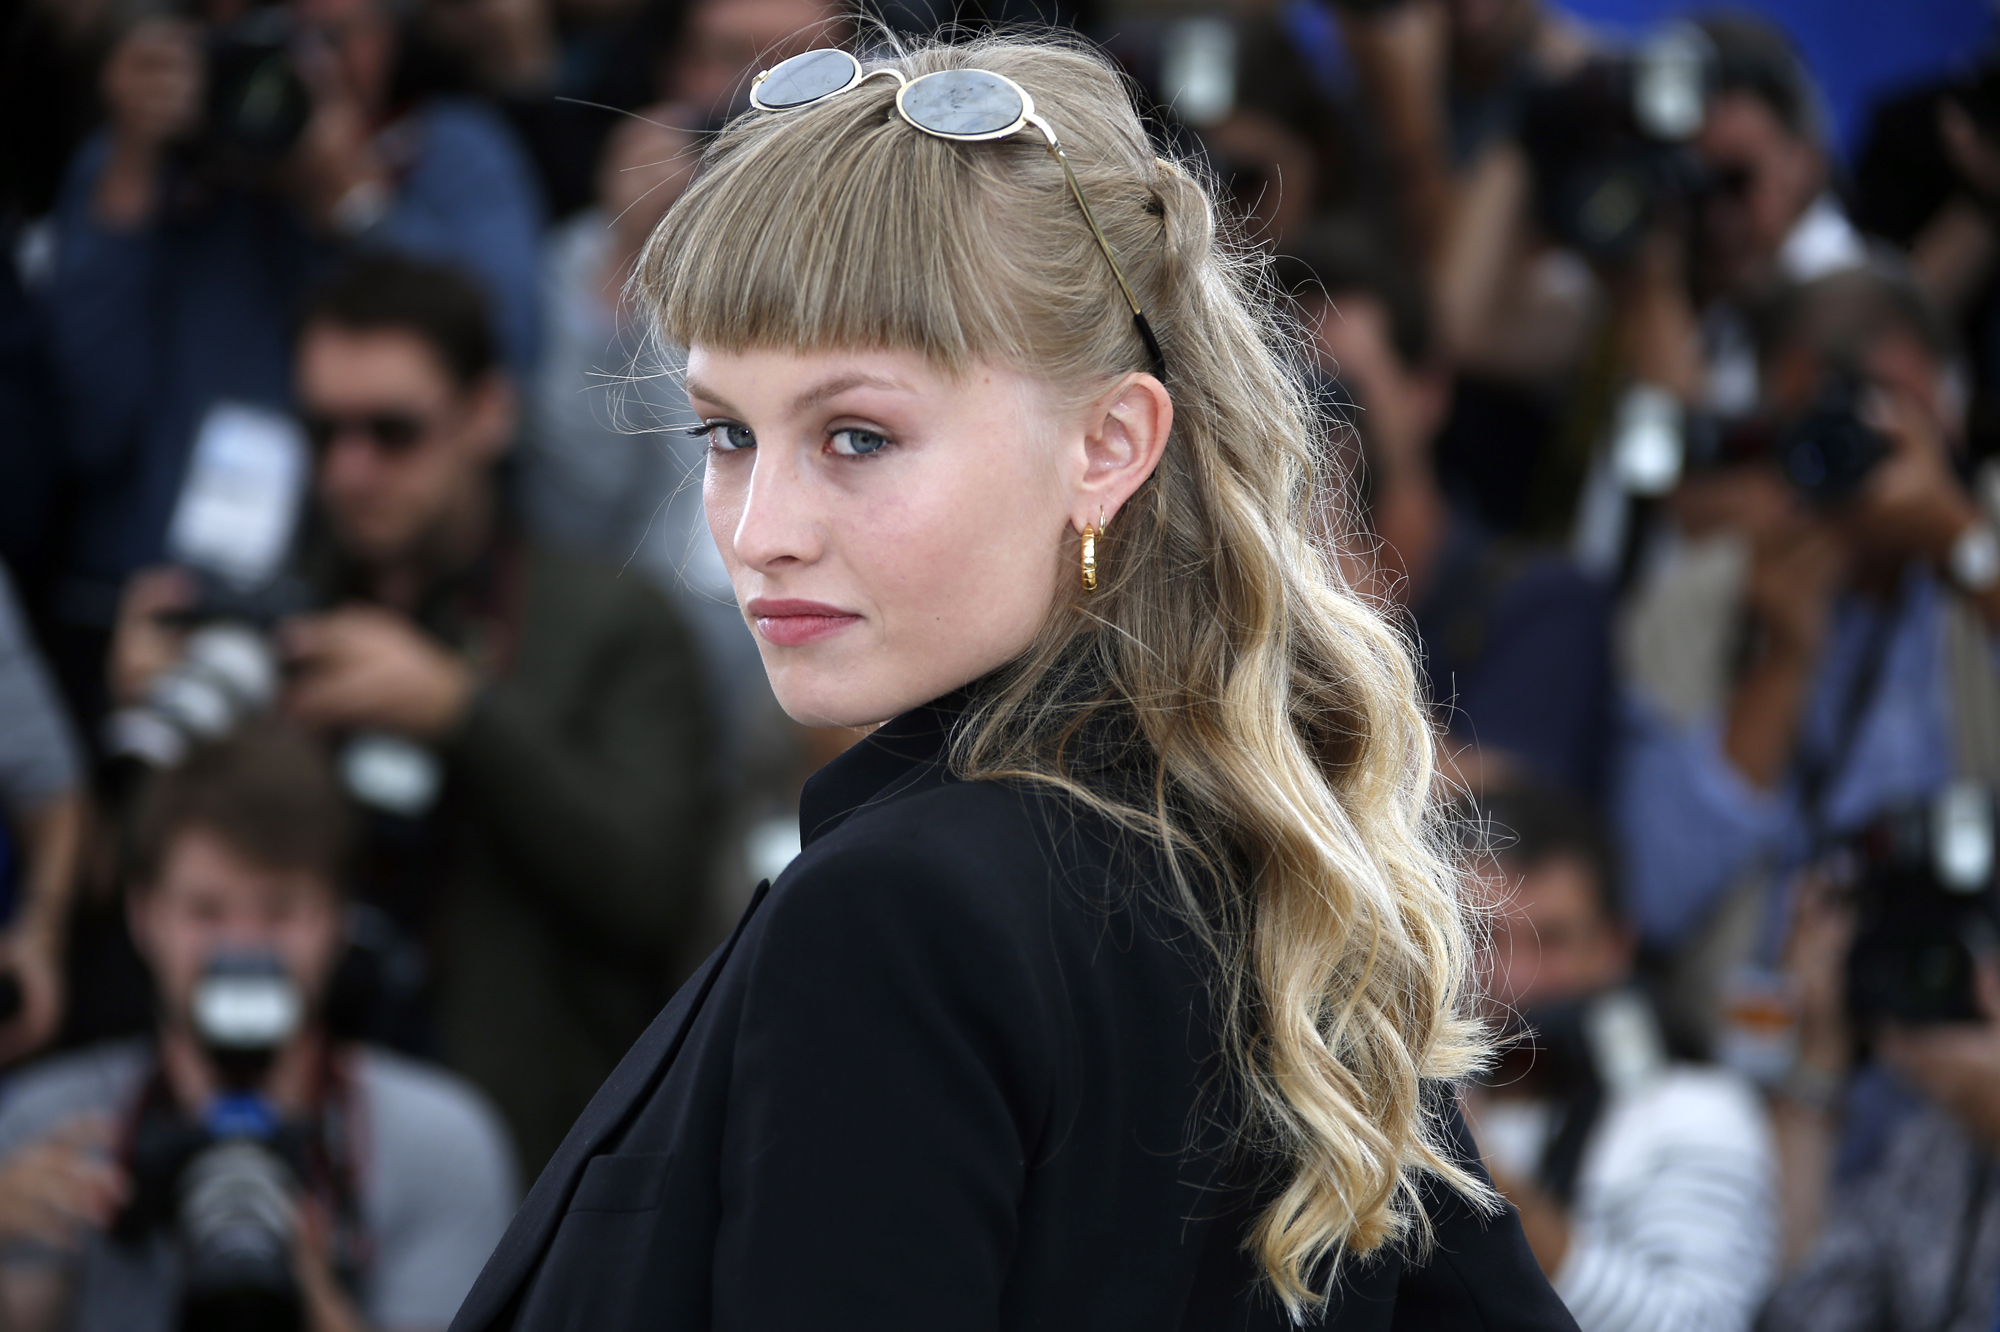 Cast member Klara Kristin poses during a photocall for the film "Love" out of competition at the 68th Cannes Film Festival in Cannes, southern France, May 21, 2015. REUTERS/Eric Gaillard - RTX1DY58